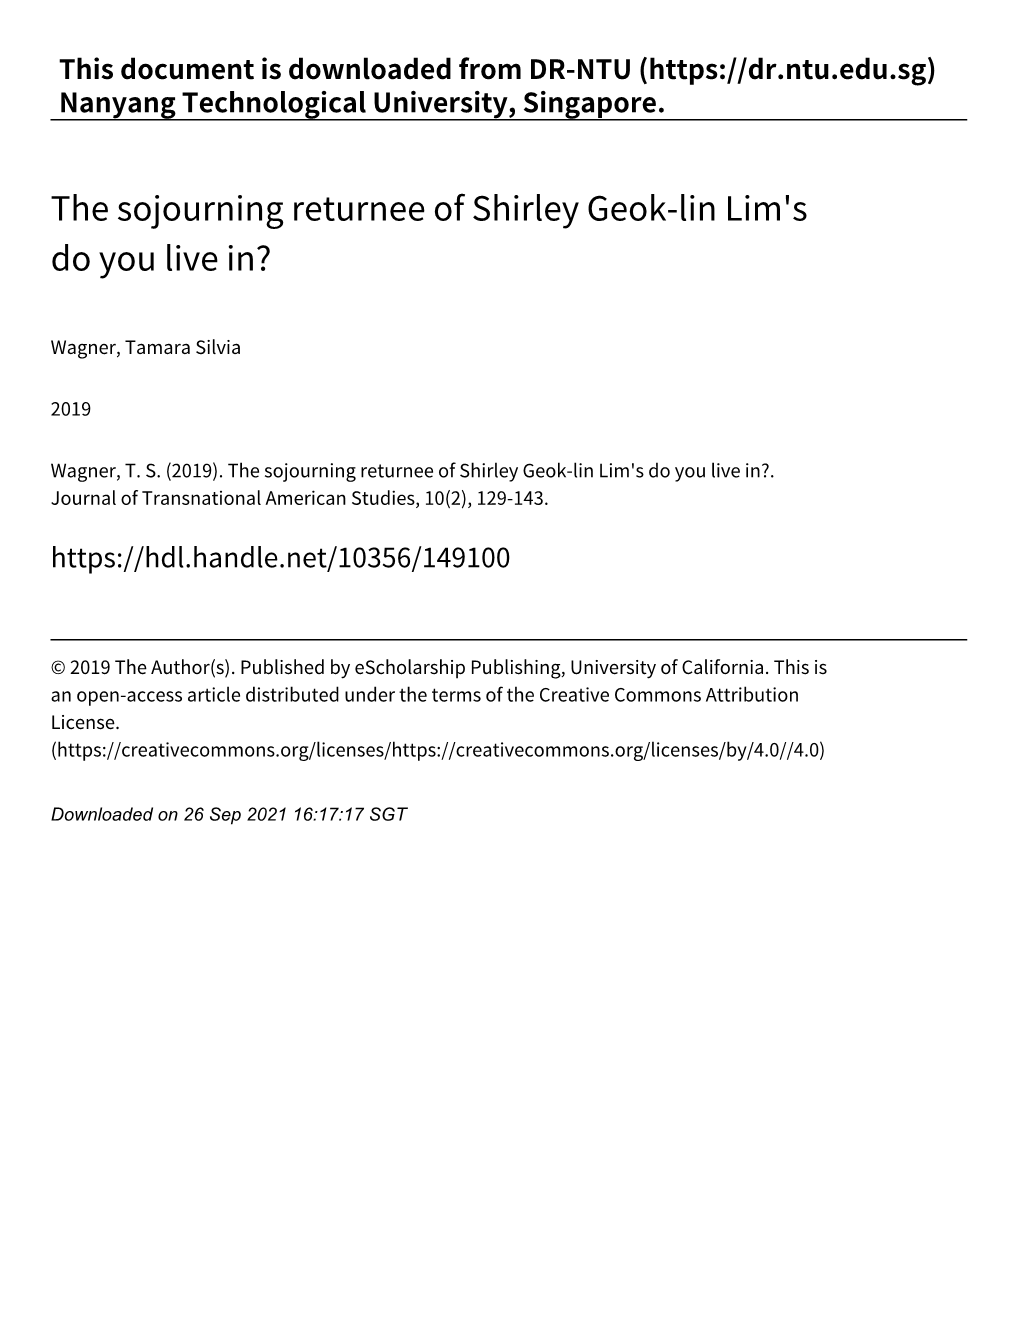 The Sojourning Returnee of Shirley Geok-Lin Lim's Do You Live In.Pdf